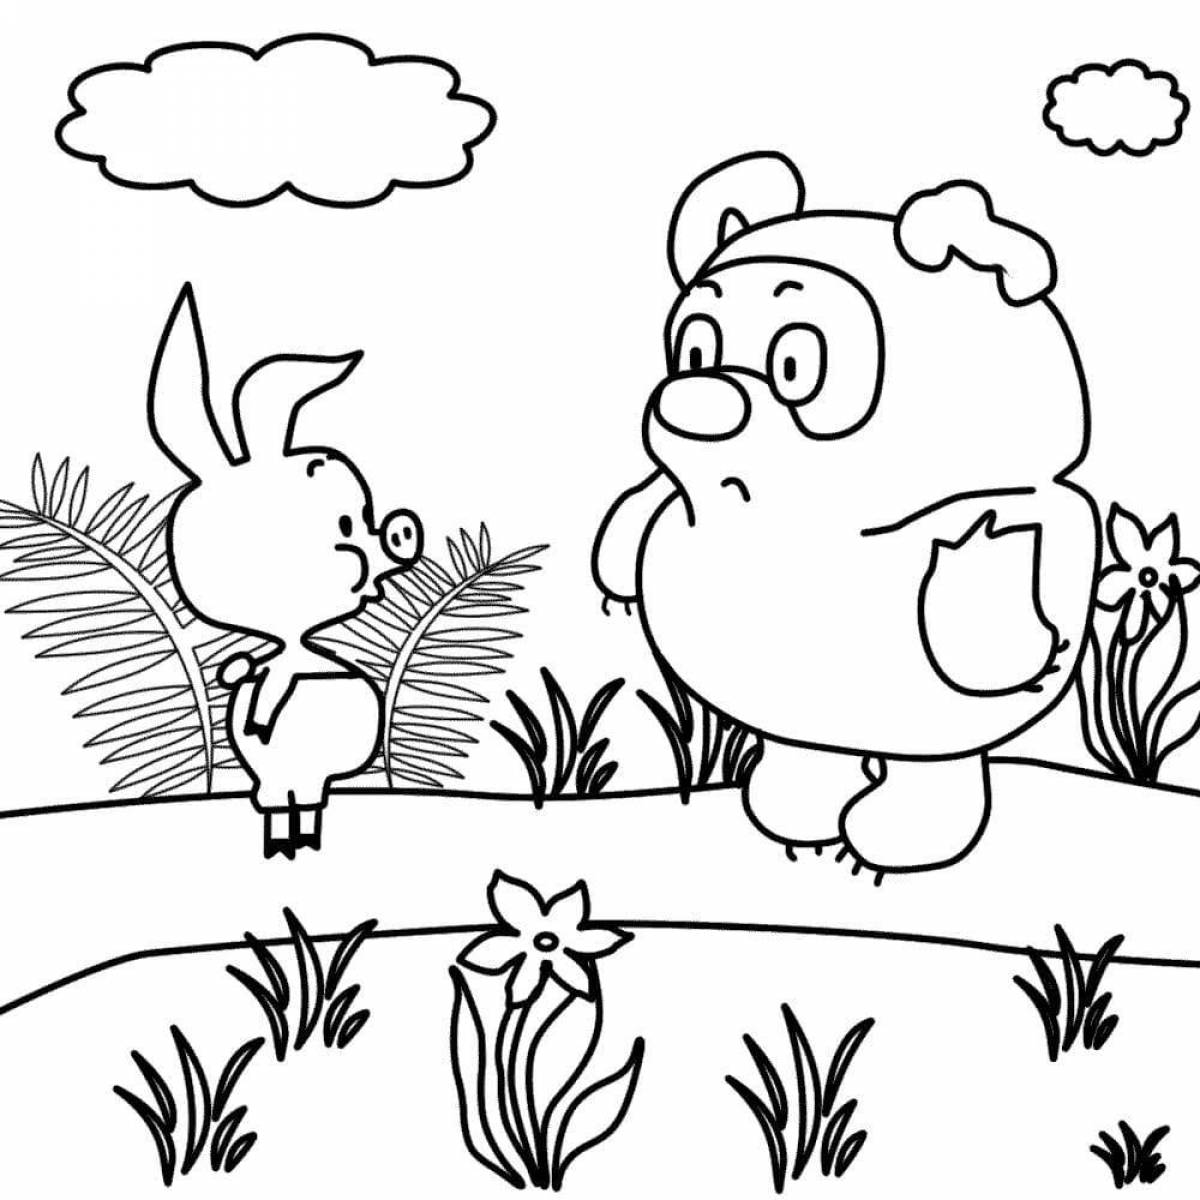 Tender all coloring pages